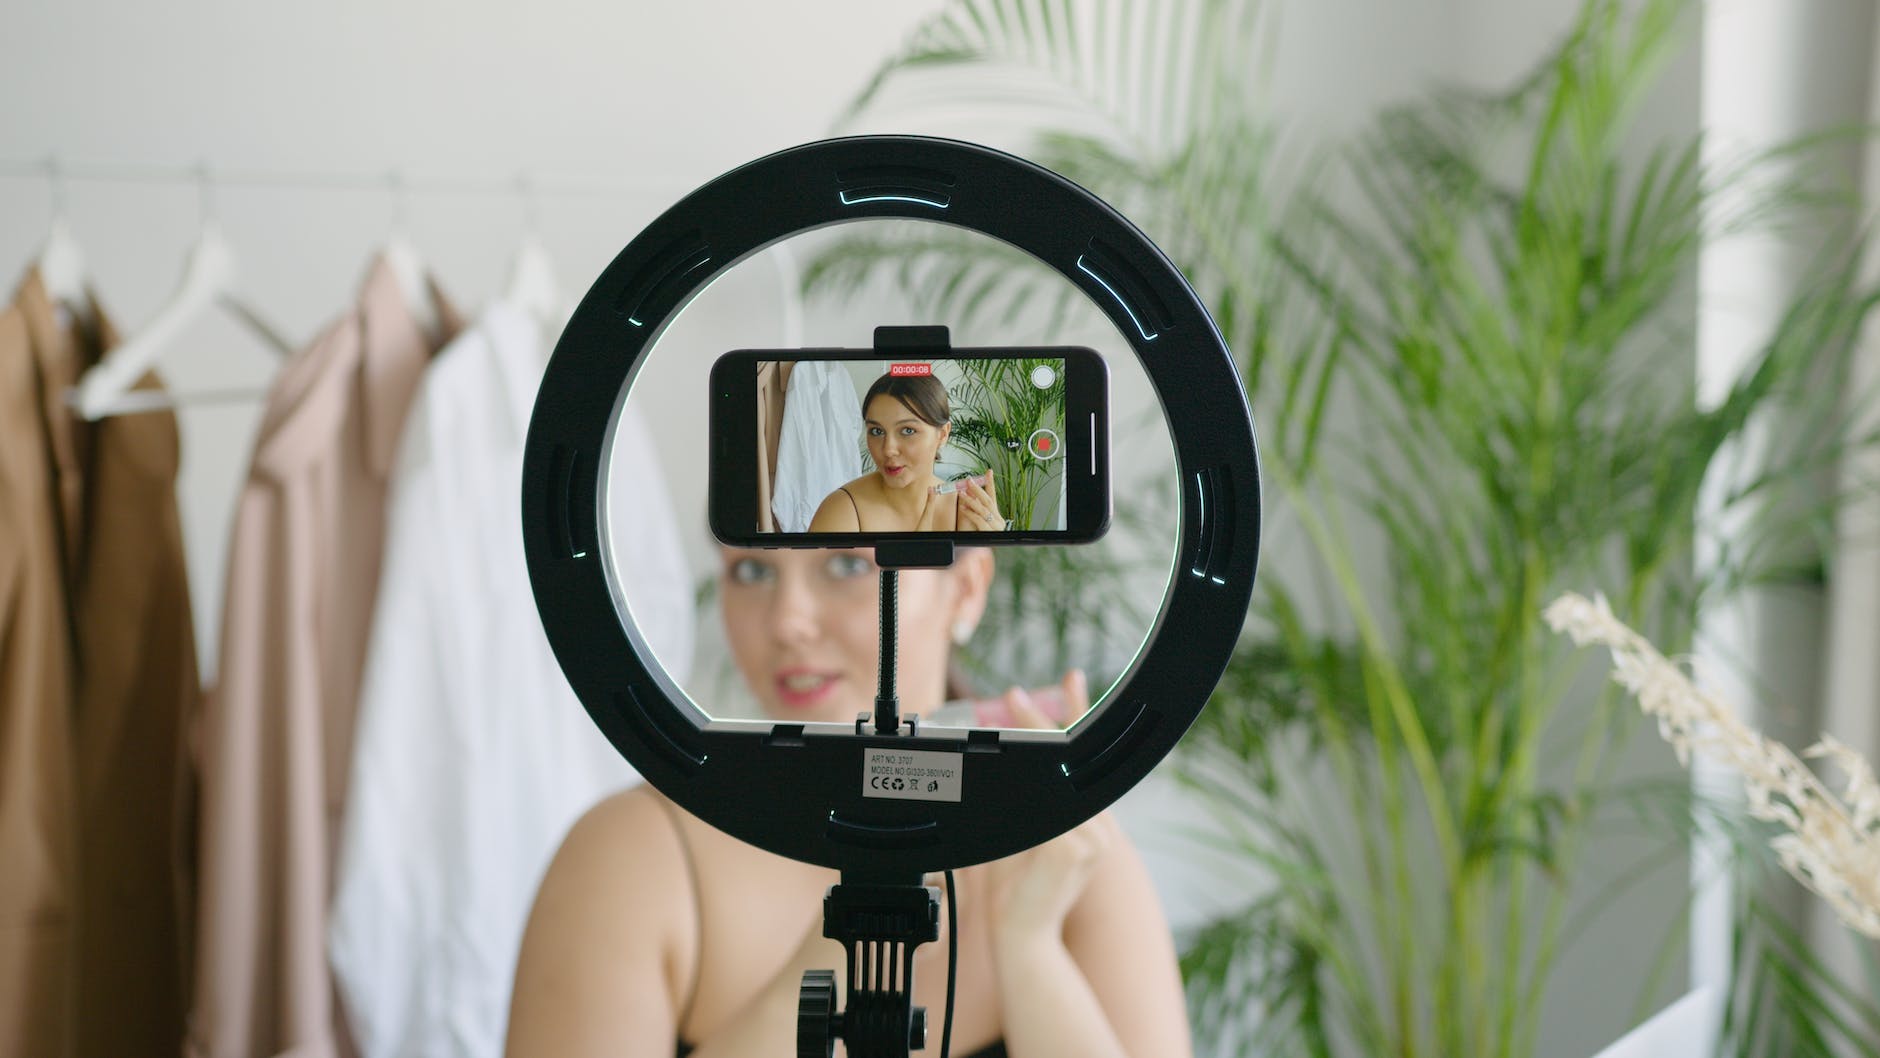 a woman video recording herself using a cellphone camera